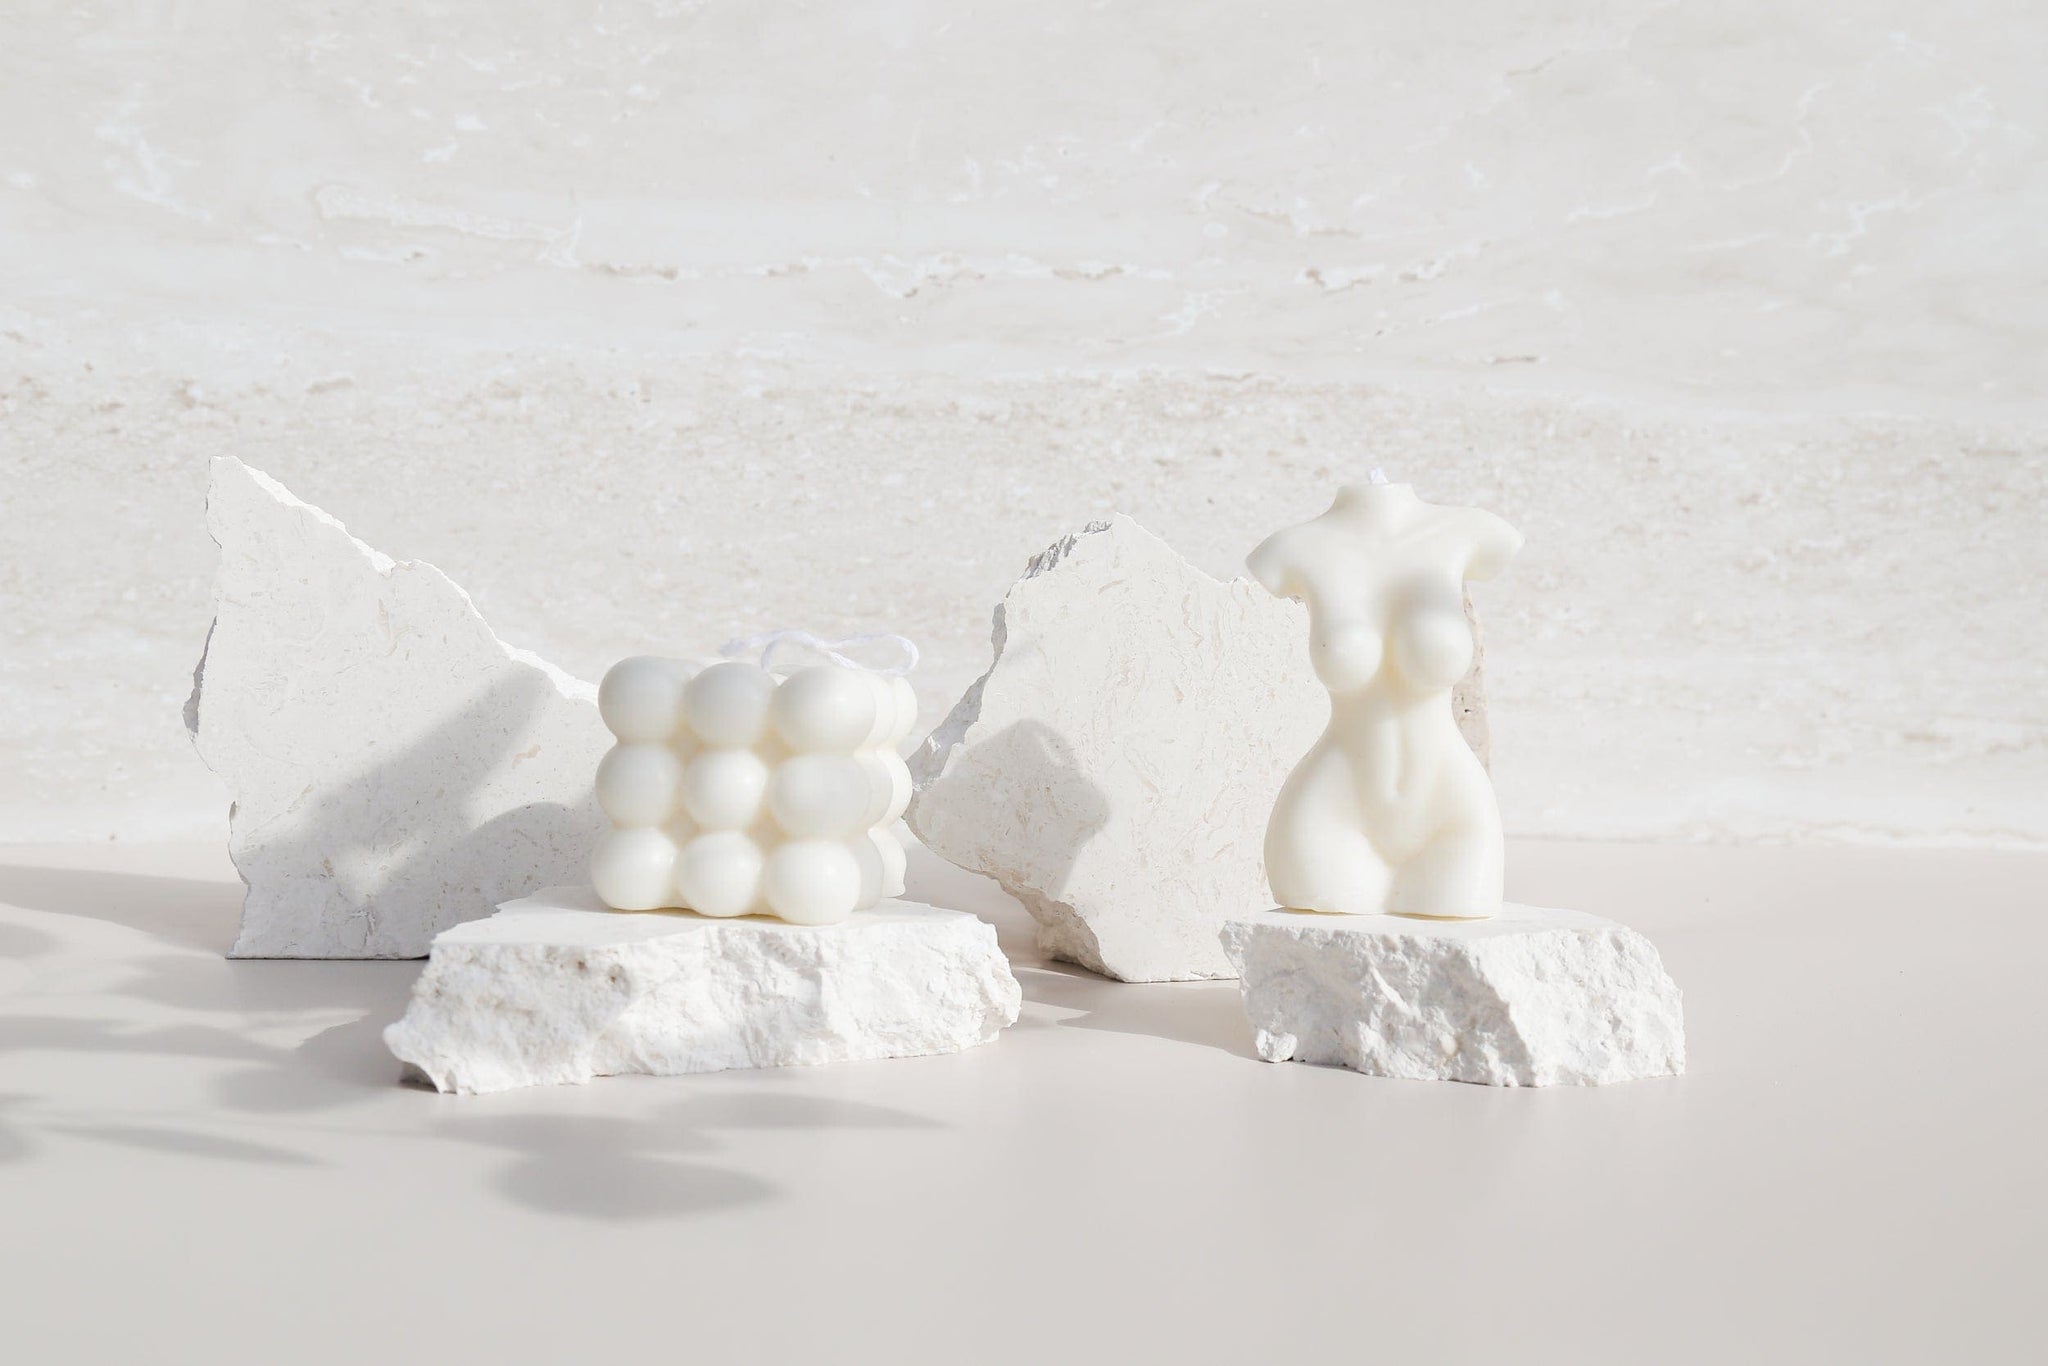 naked lady and cube candles on white limestone stone props with creamy travertine stone waterproof photography backdrop - backdrop collective australia